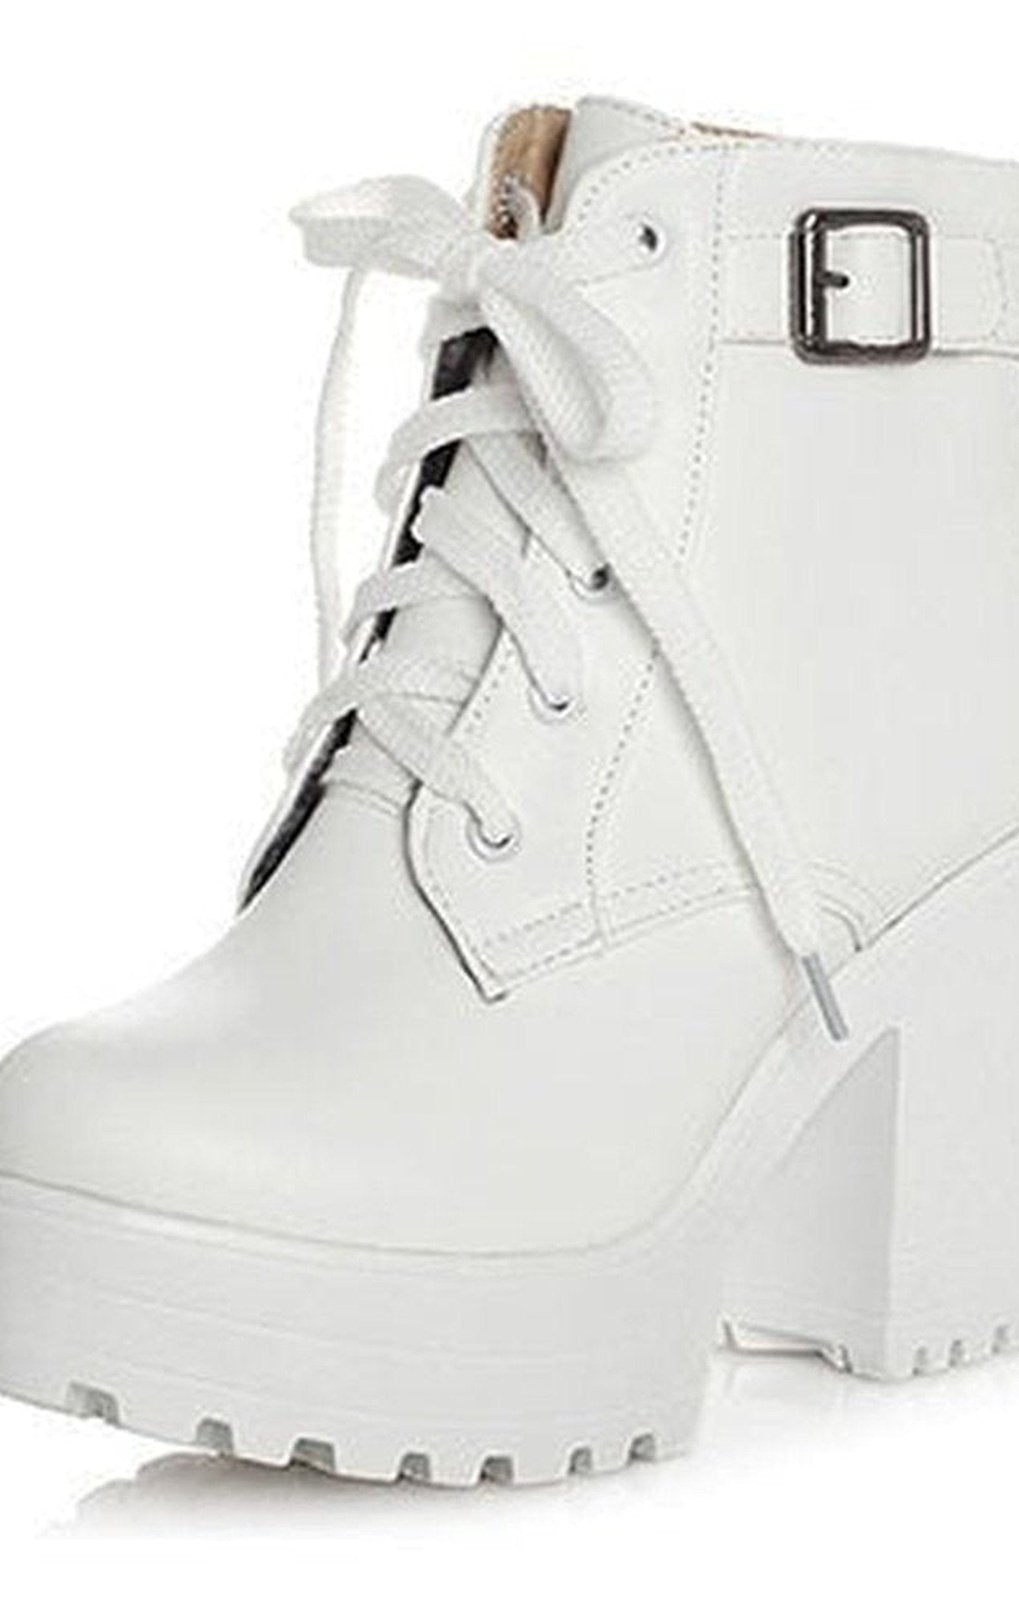 Chunky Heel Booties with Laces and Strap - Glossy Finish ( 3 COLORS)